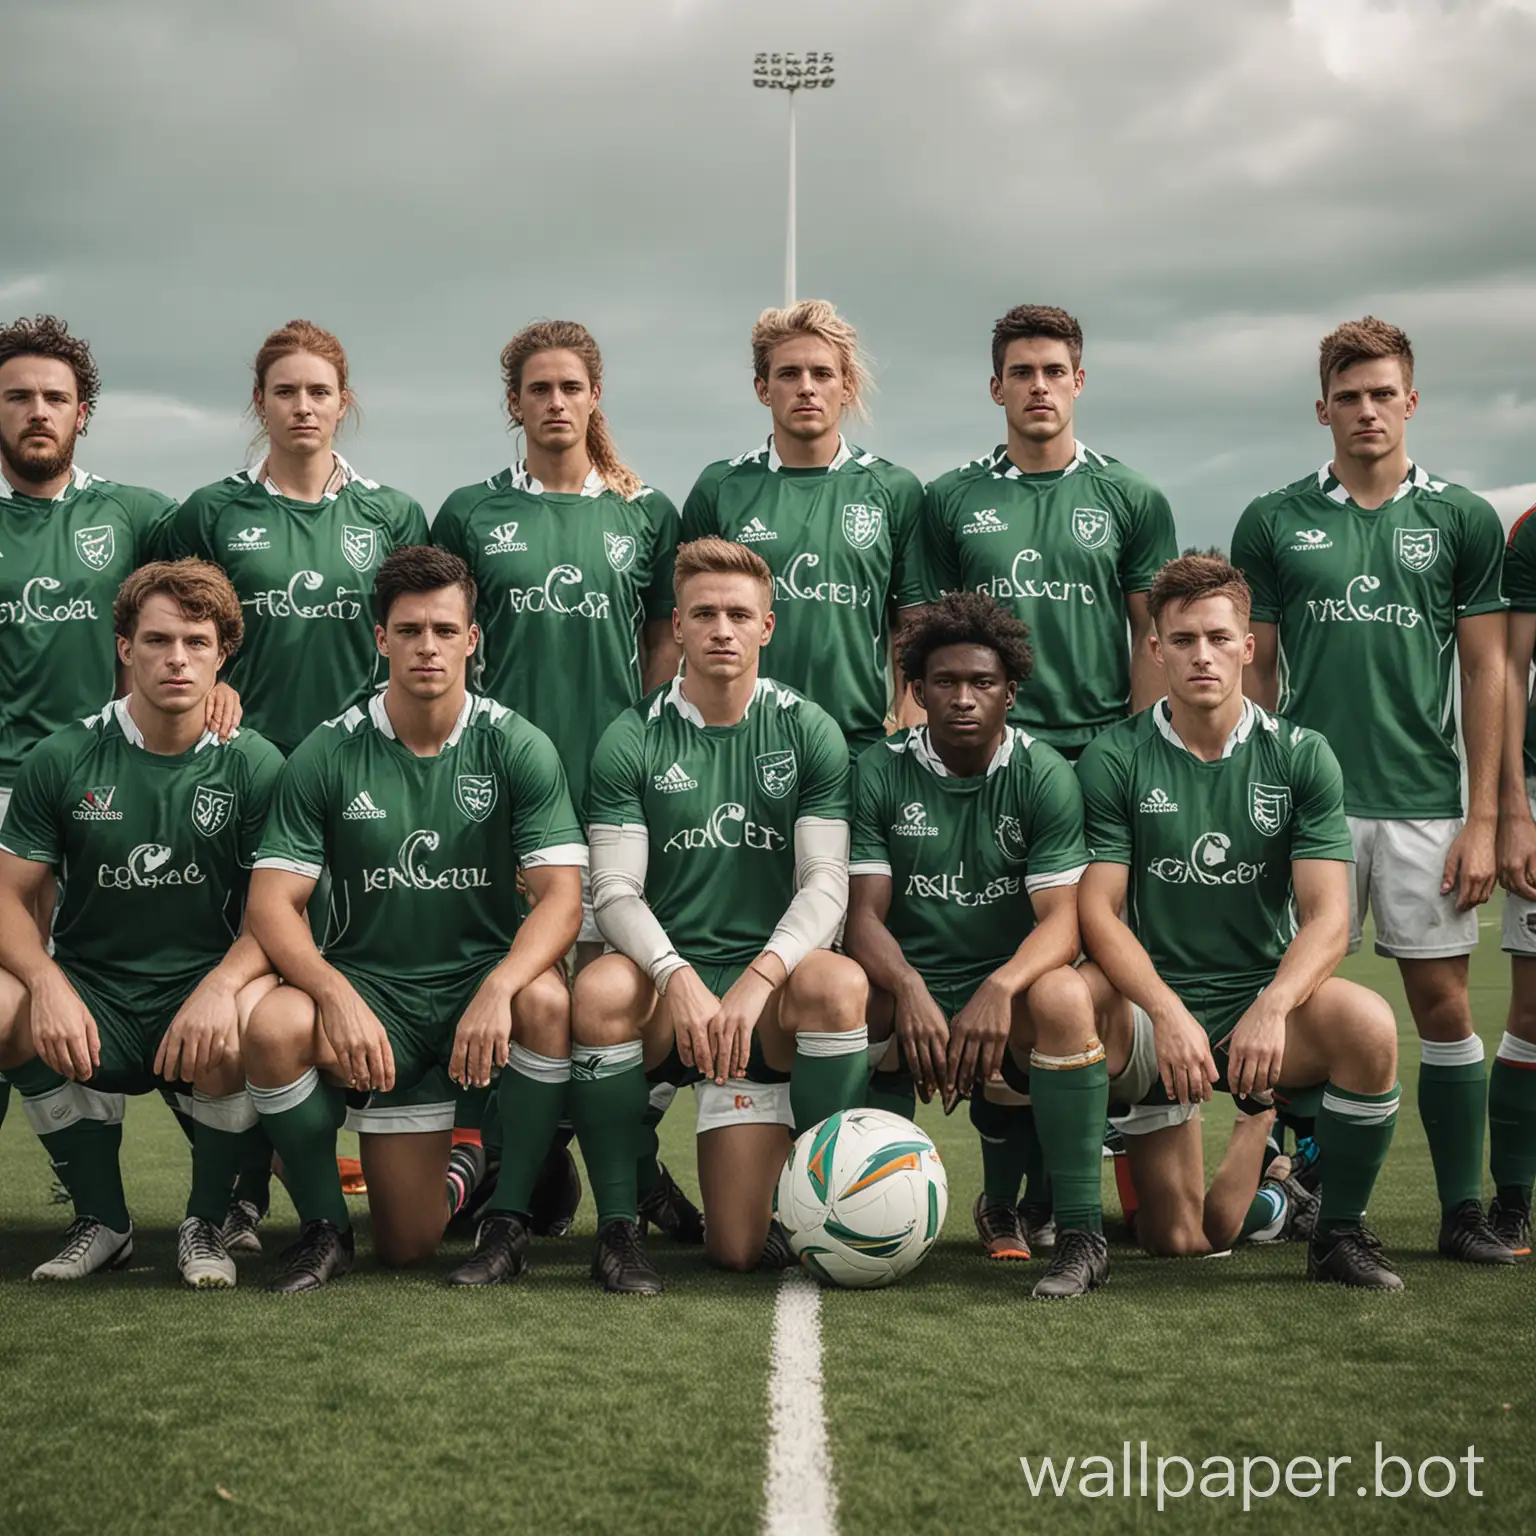 a team taking a team photo playing some futuristic sport, the sport is biased of rugby and soccer. the team colors are white and green , the players come from all backgrounds.